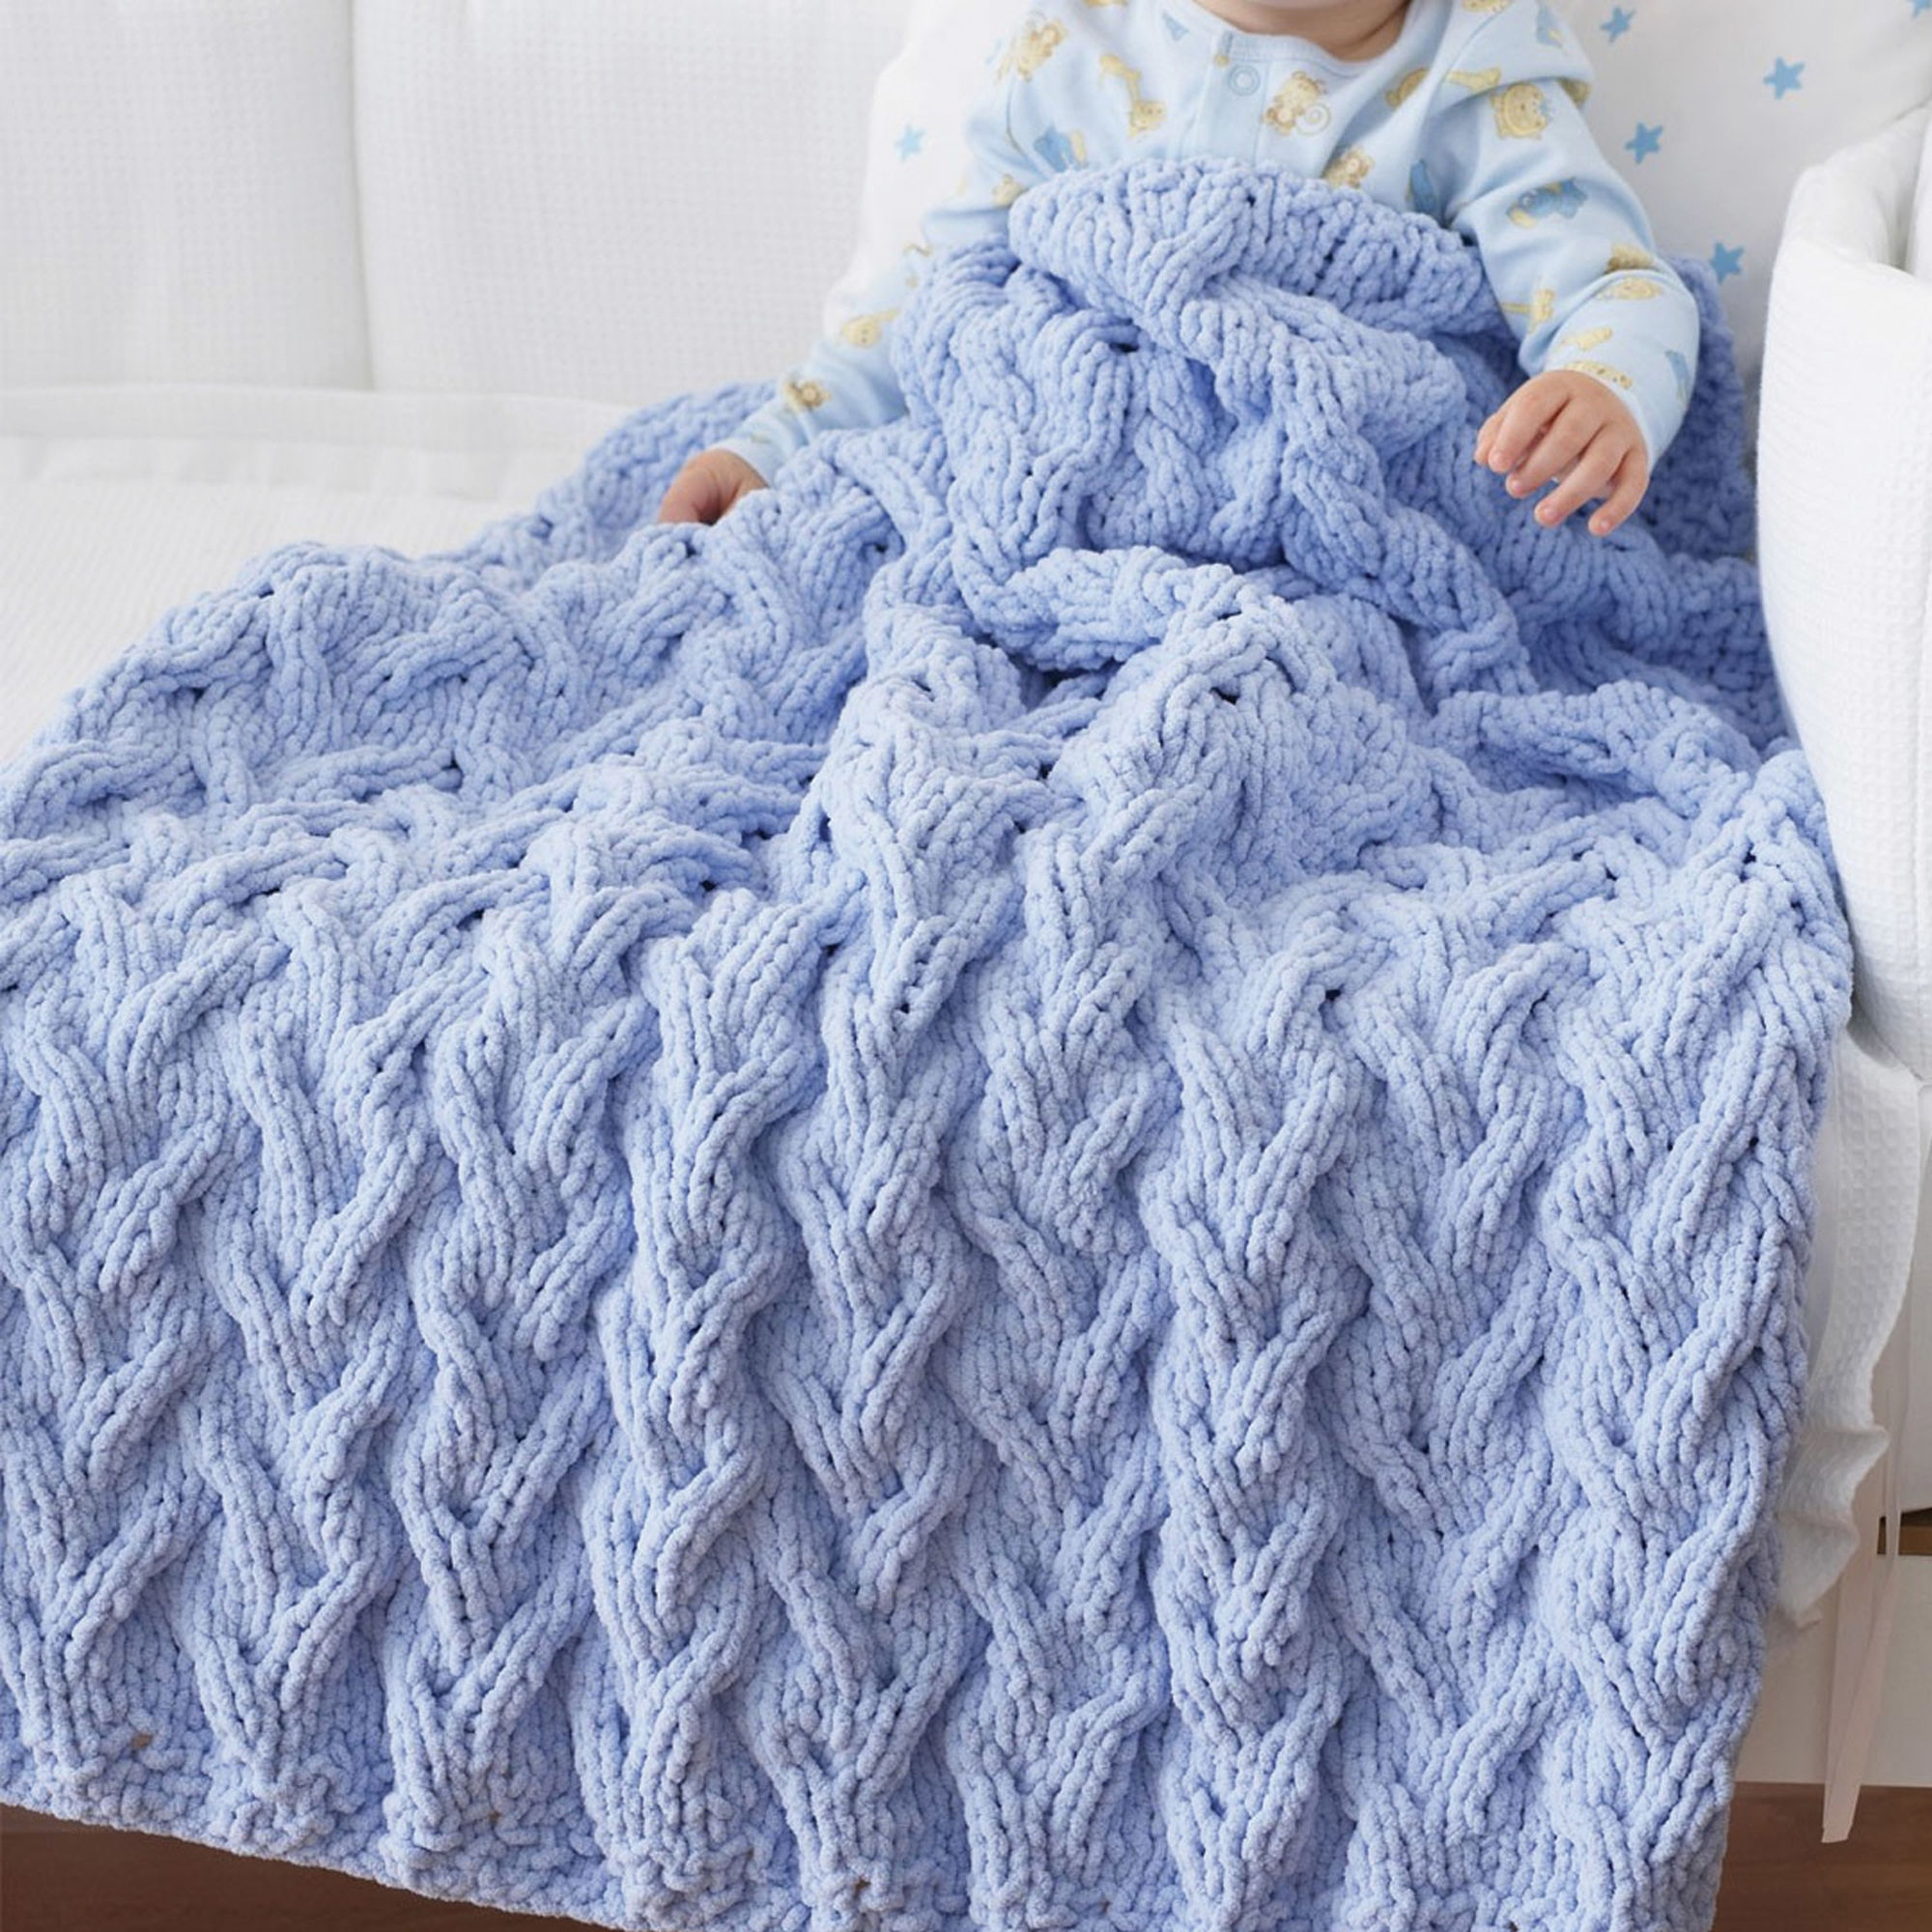 Free Knit Cable Patterns Lovely Cabled Ba Blanket Free Knitting Pattern